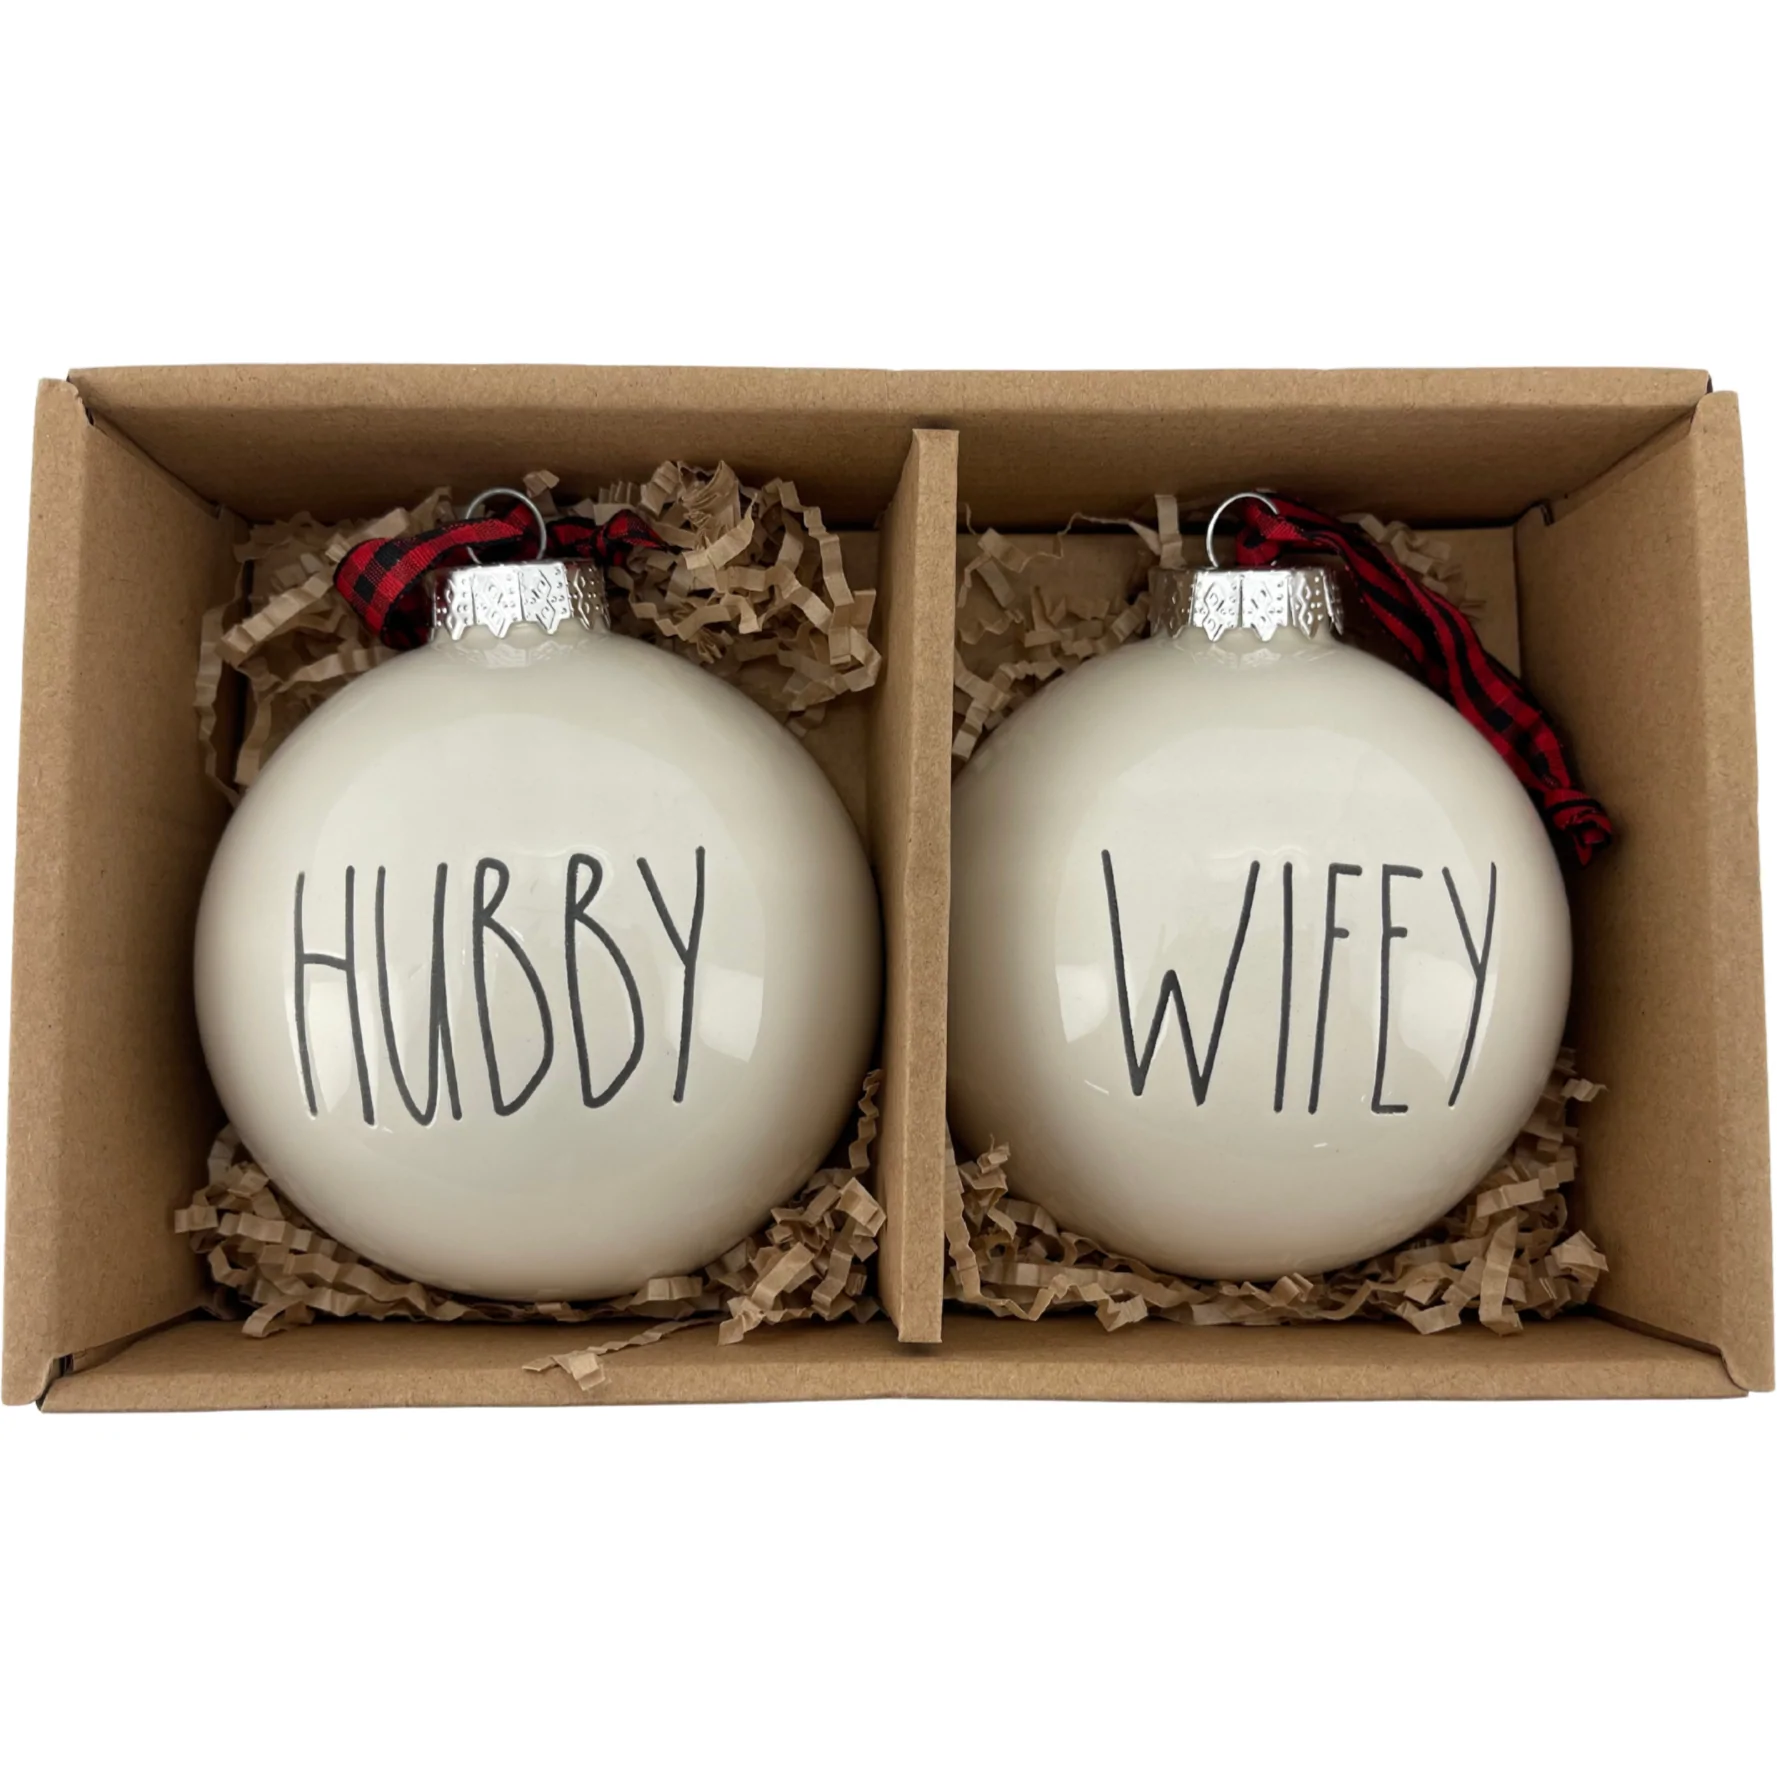 Rae Dunn Christmas Ornament Set / "Hubby" and "Wifey" / White & Black **DEALS**